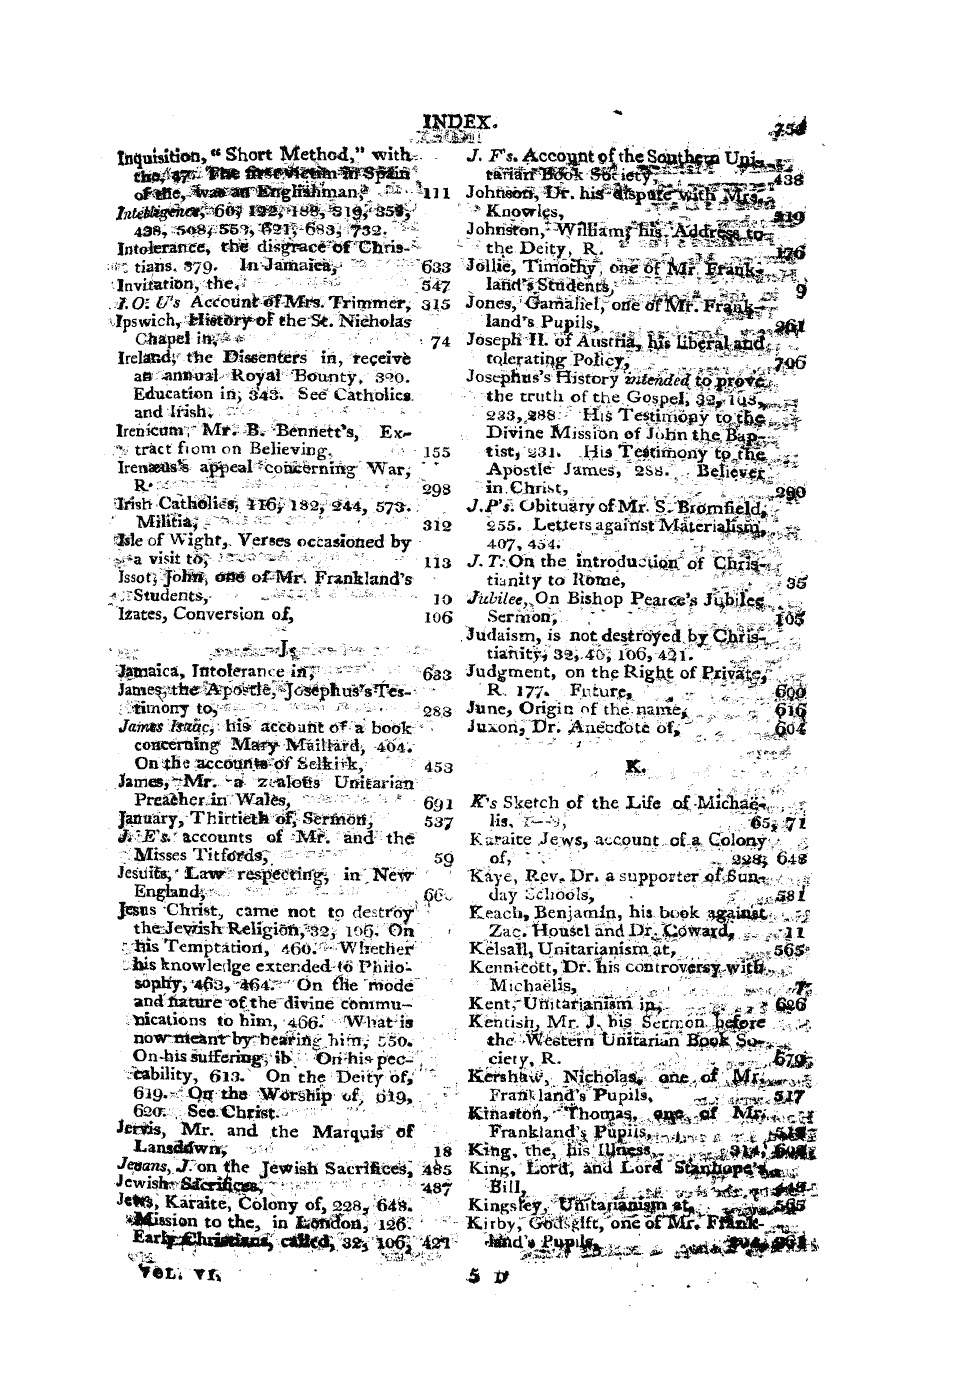 Monthly Repository (1806-1838) and Unitarian Chronicle (1832-1833): F Y, 1st edition, End matter - Untitled Article